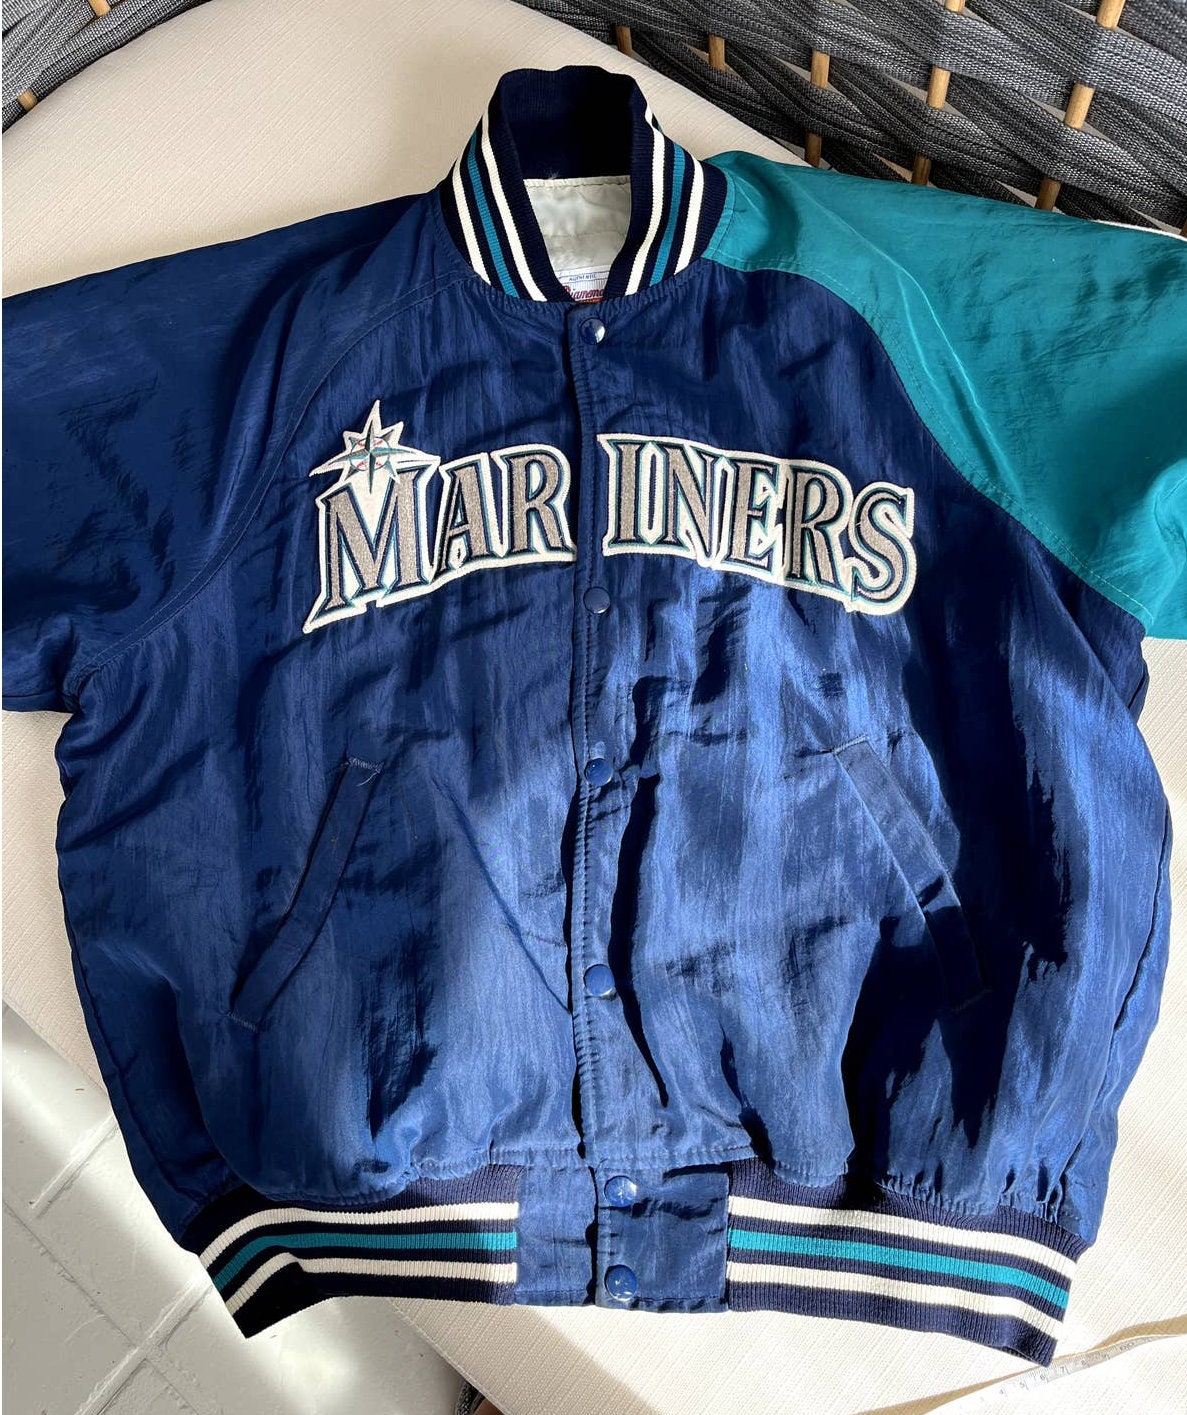 Seattle Mariners The Double Wink 2022 ALDS Playoff Shirt, hoodie, sweater,  long sleeve and tank top